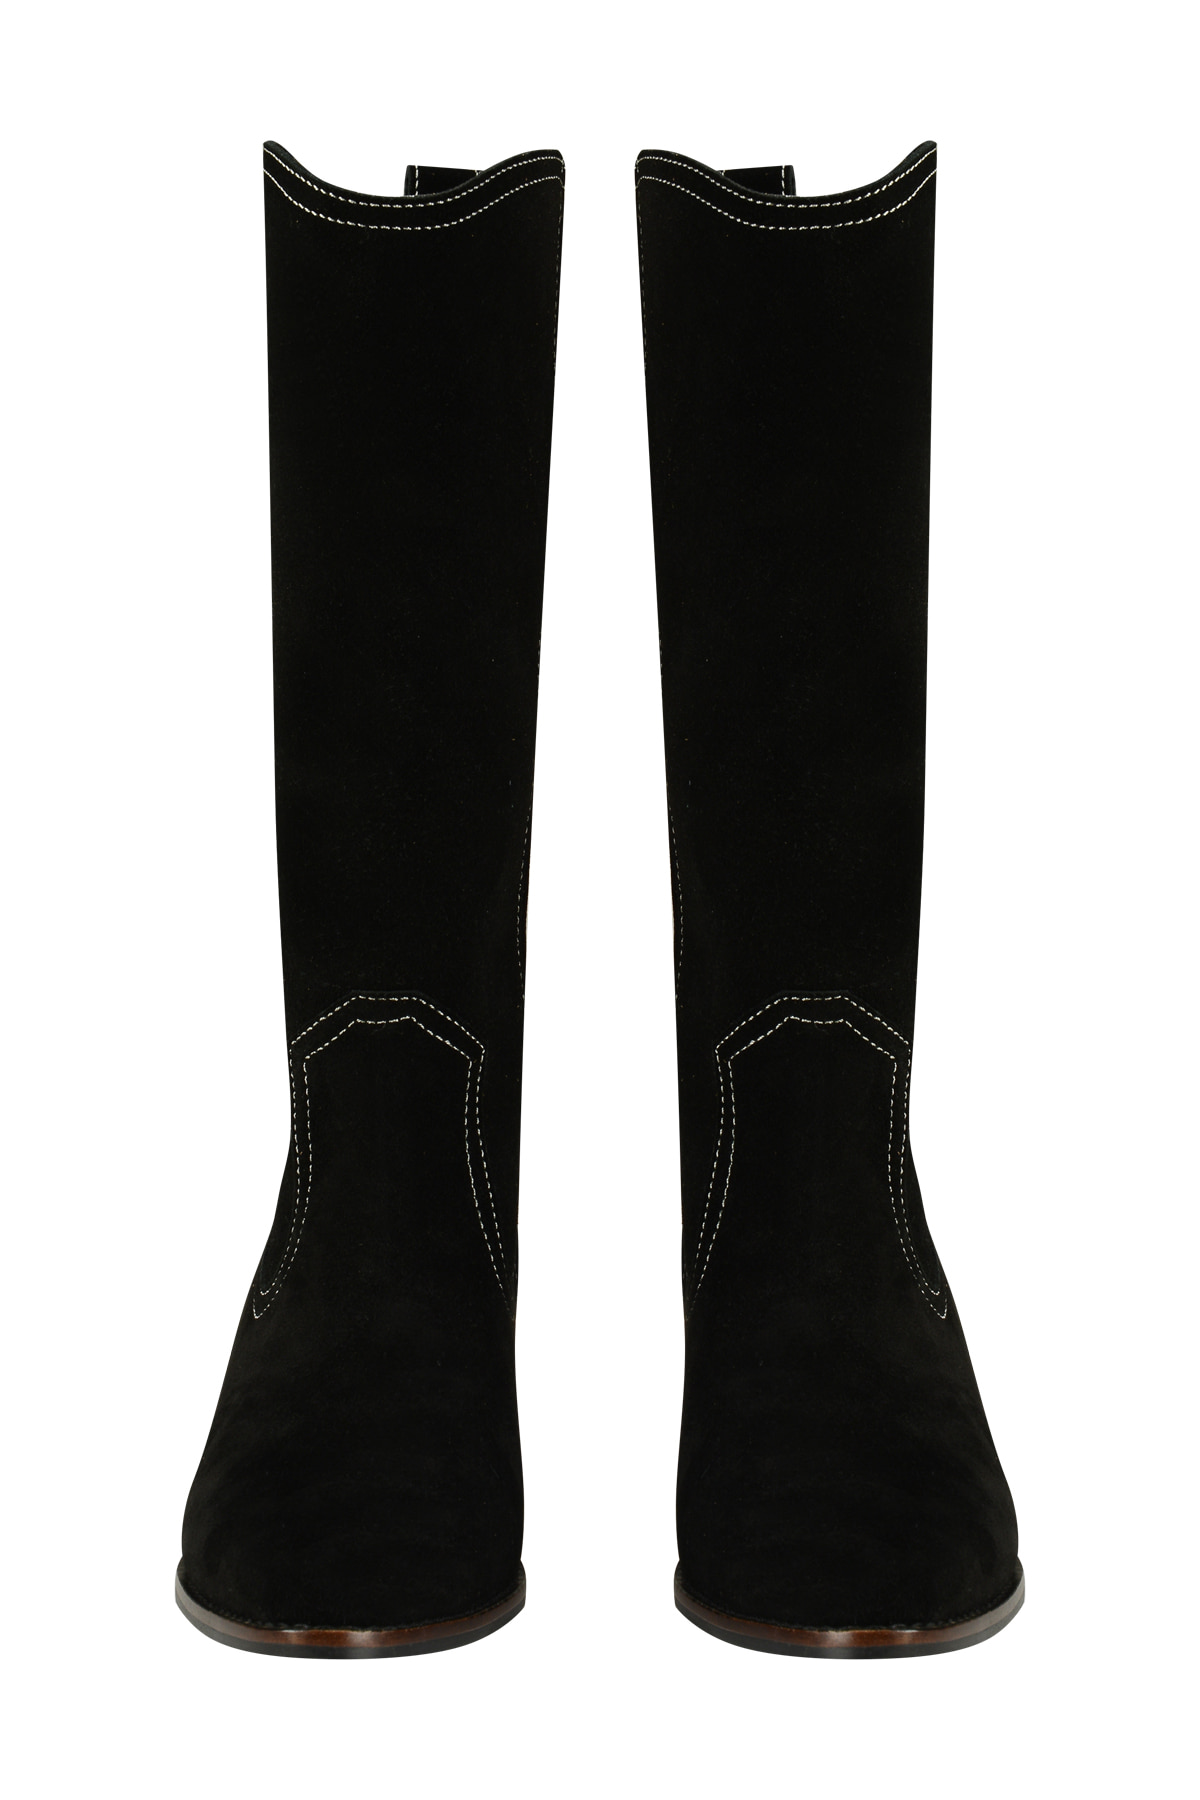 WESTERN MIDDLE BOOTS IN BLACK